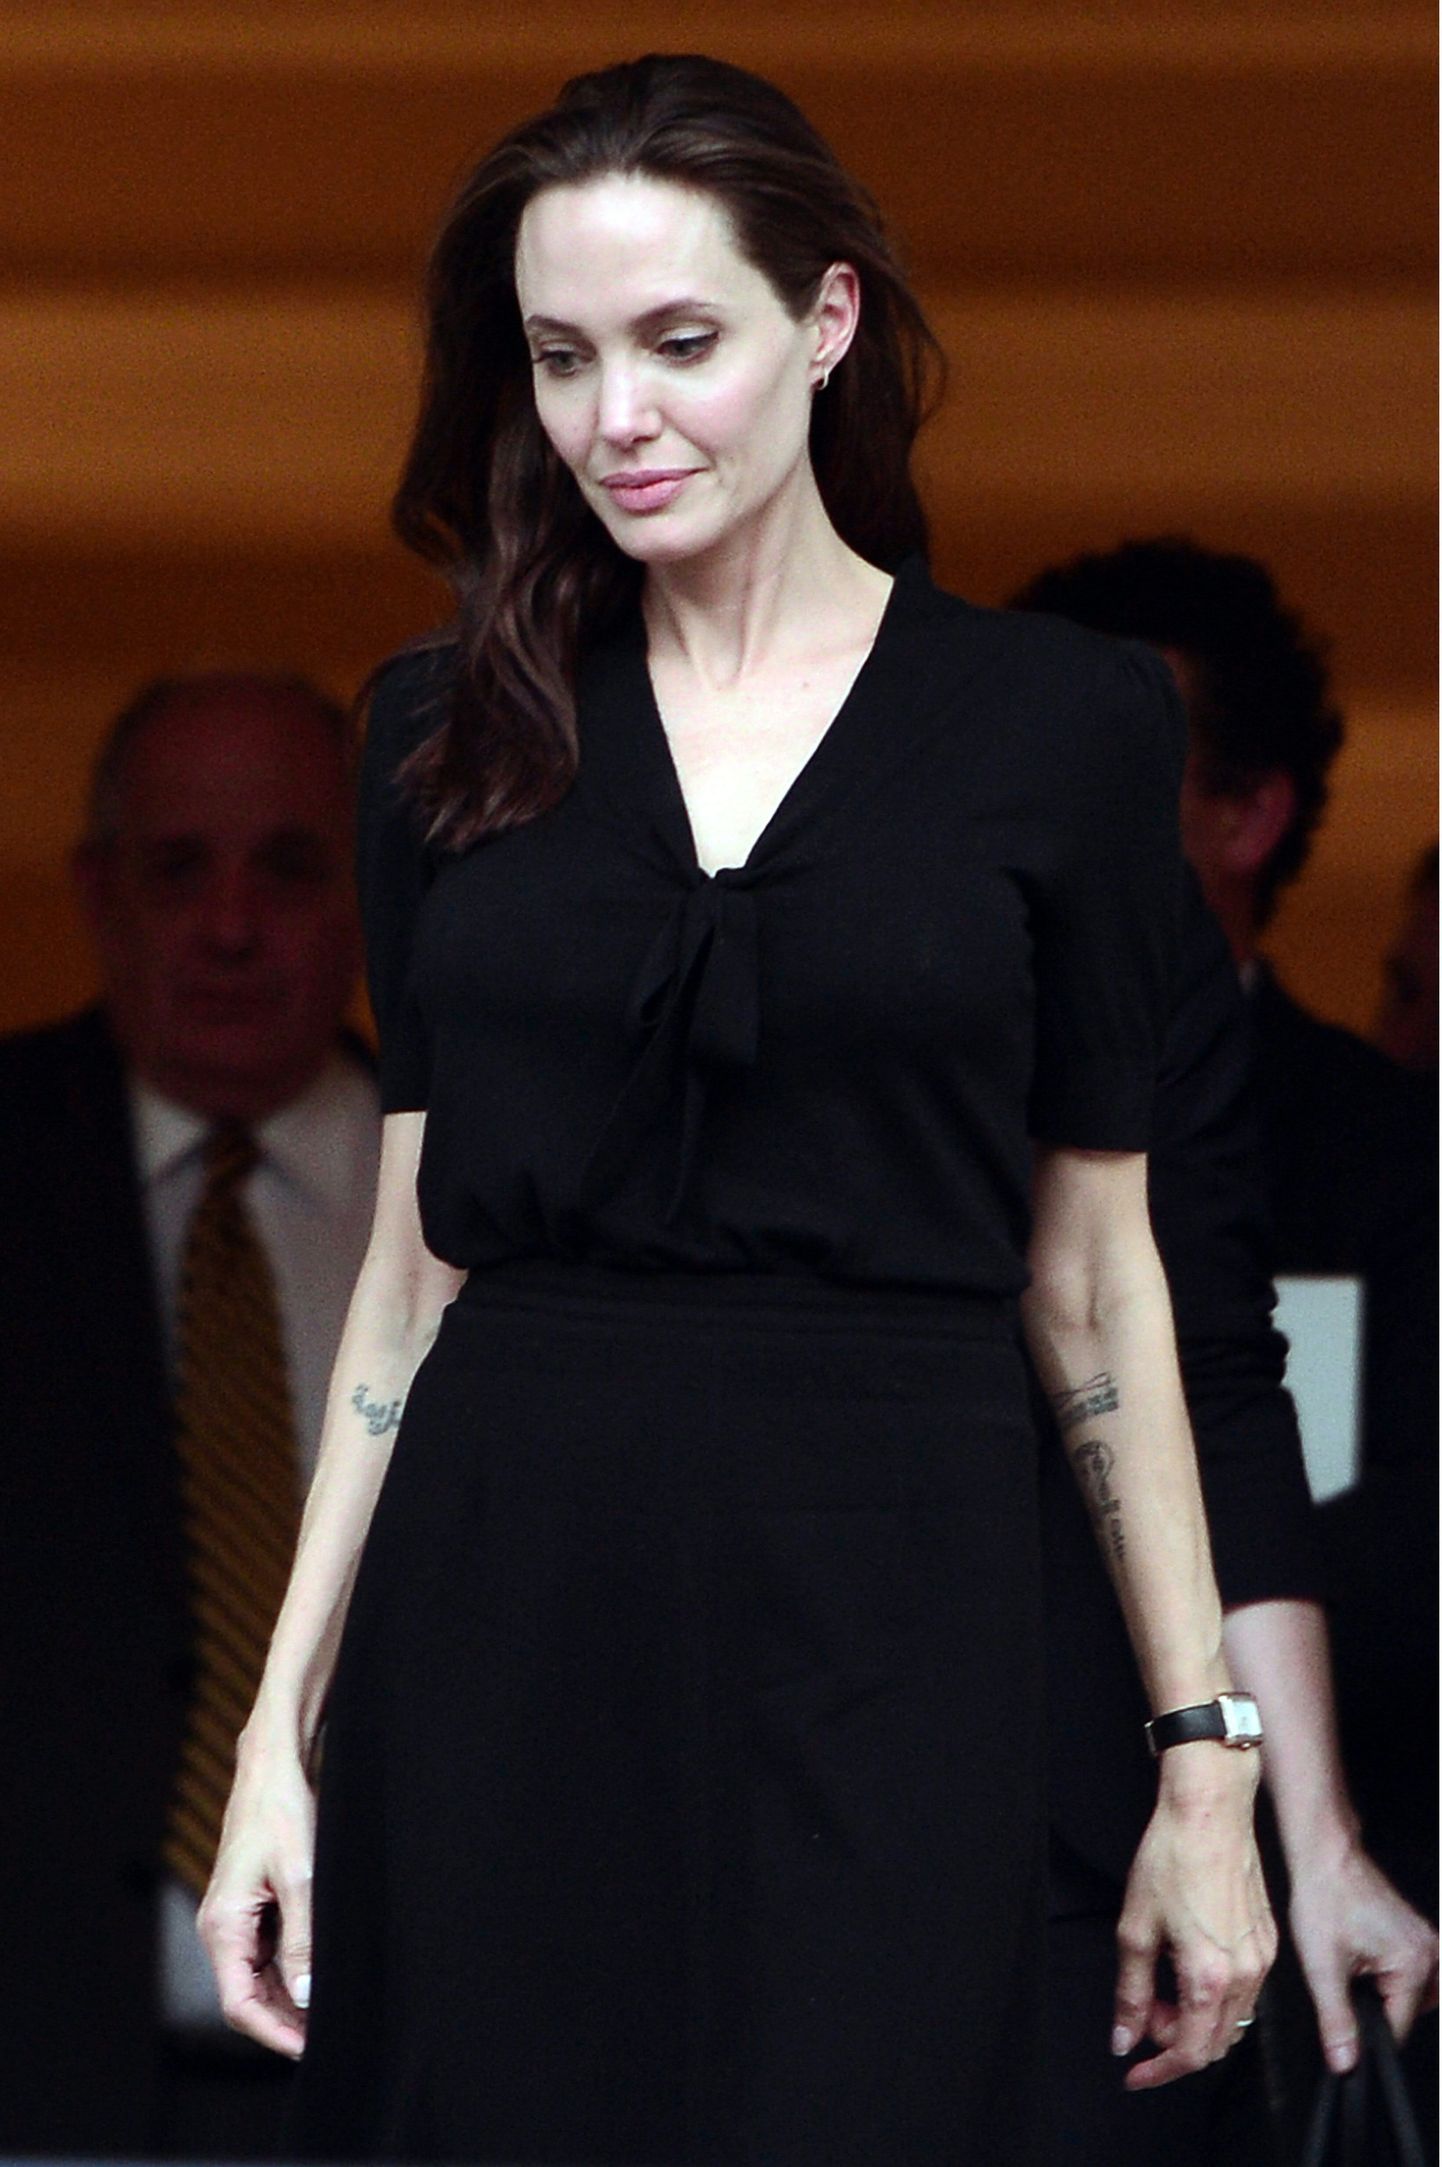 Hollywood star and UN refugee agency envoy Angelina Jolie leaves the Greek Prime minister's office in Athens following a meeting with Greek Prime minister on March 16, 2016.   / AFP PHOTO / LOUISA GOULIAMAKI